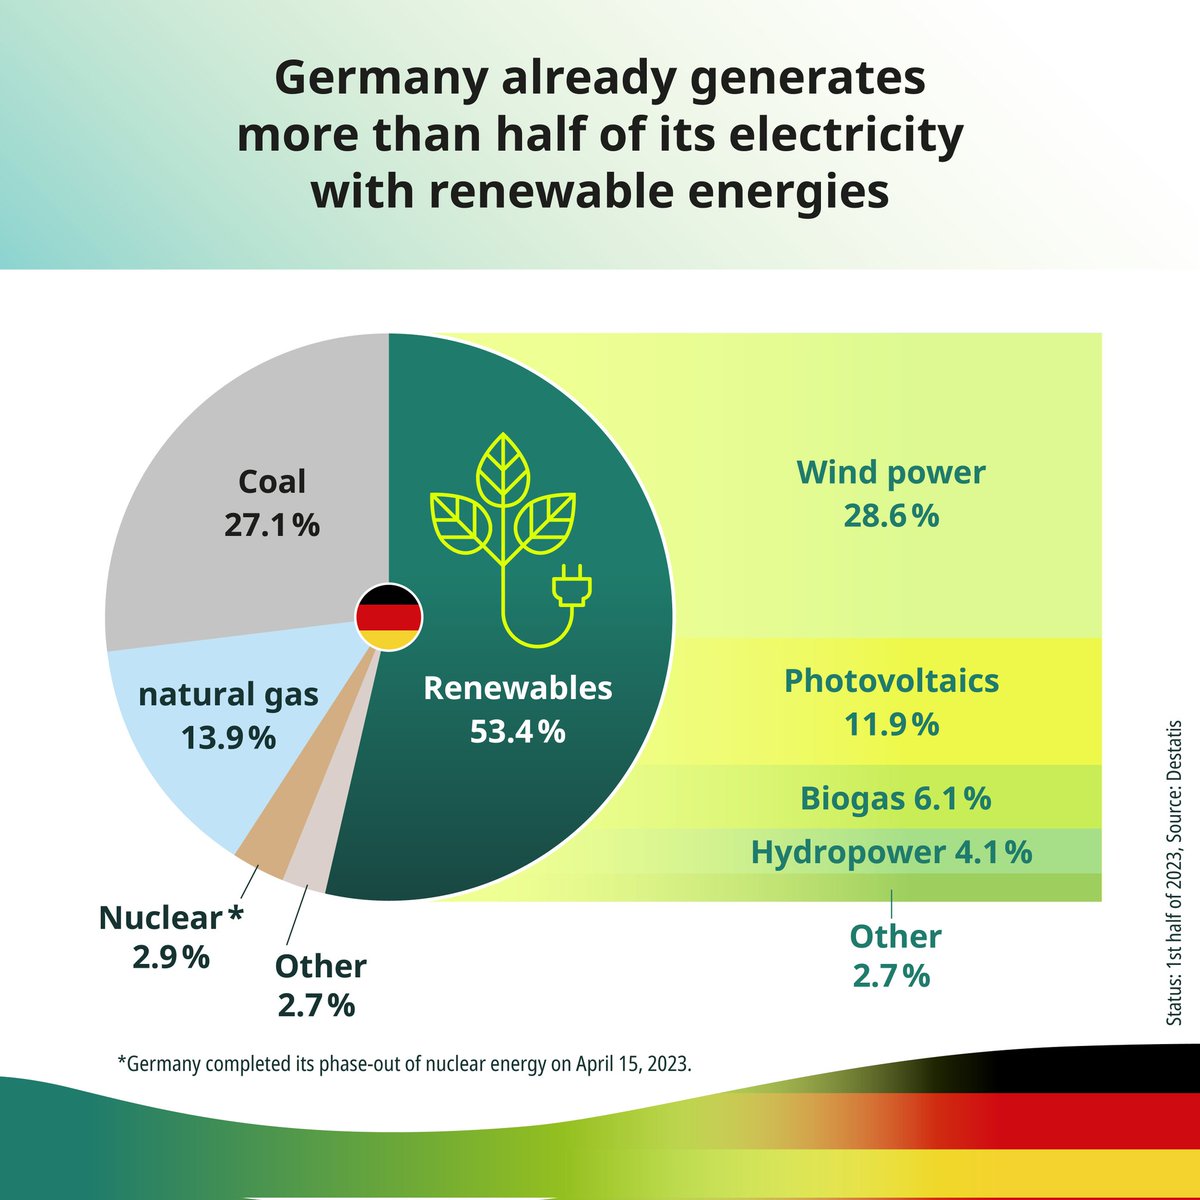 🇩🇪 Germany already generates more than half of ist electricity with renewable ernegies. #FactsaboutGermany #COP28